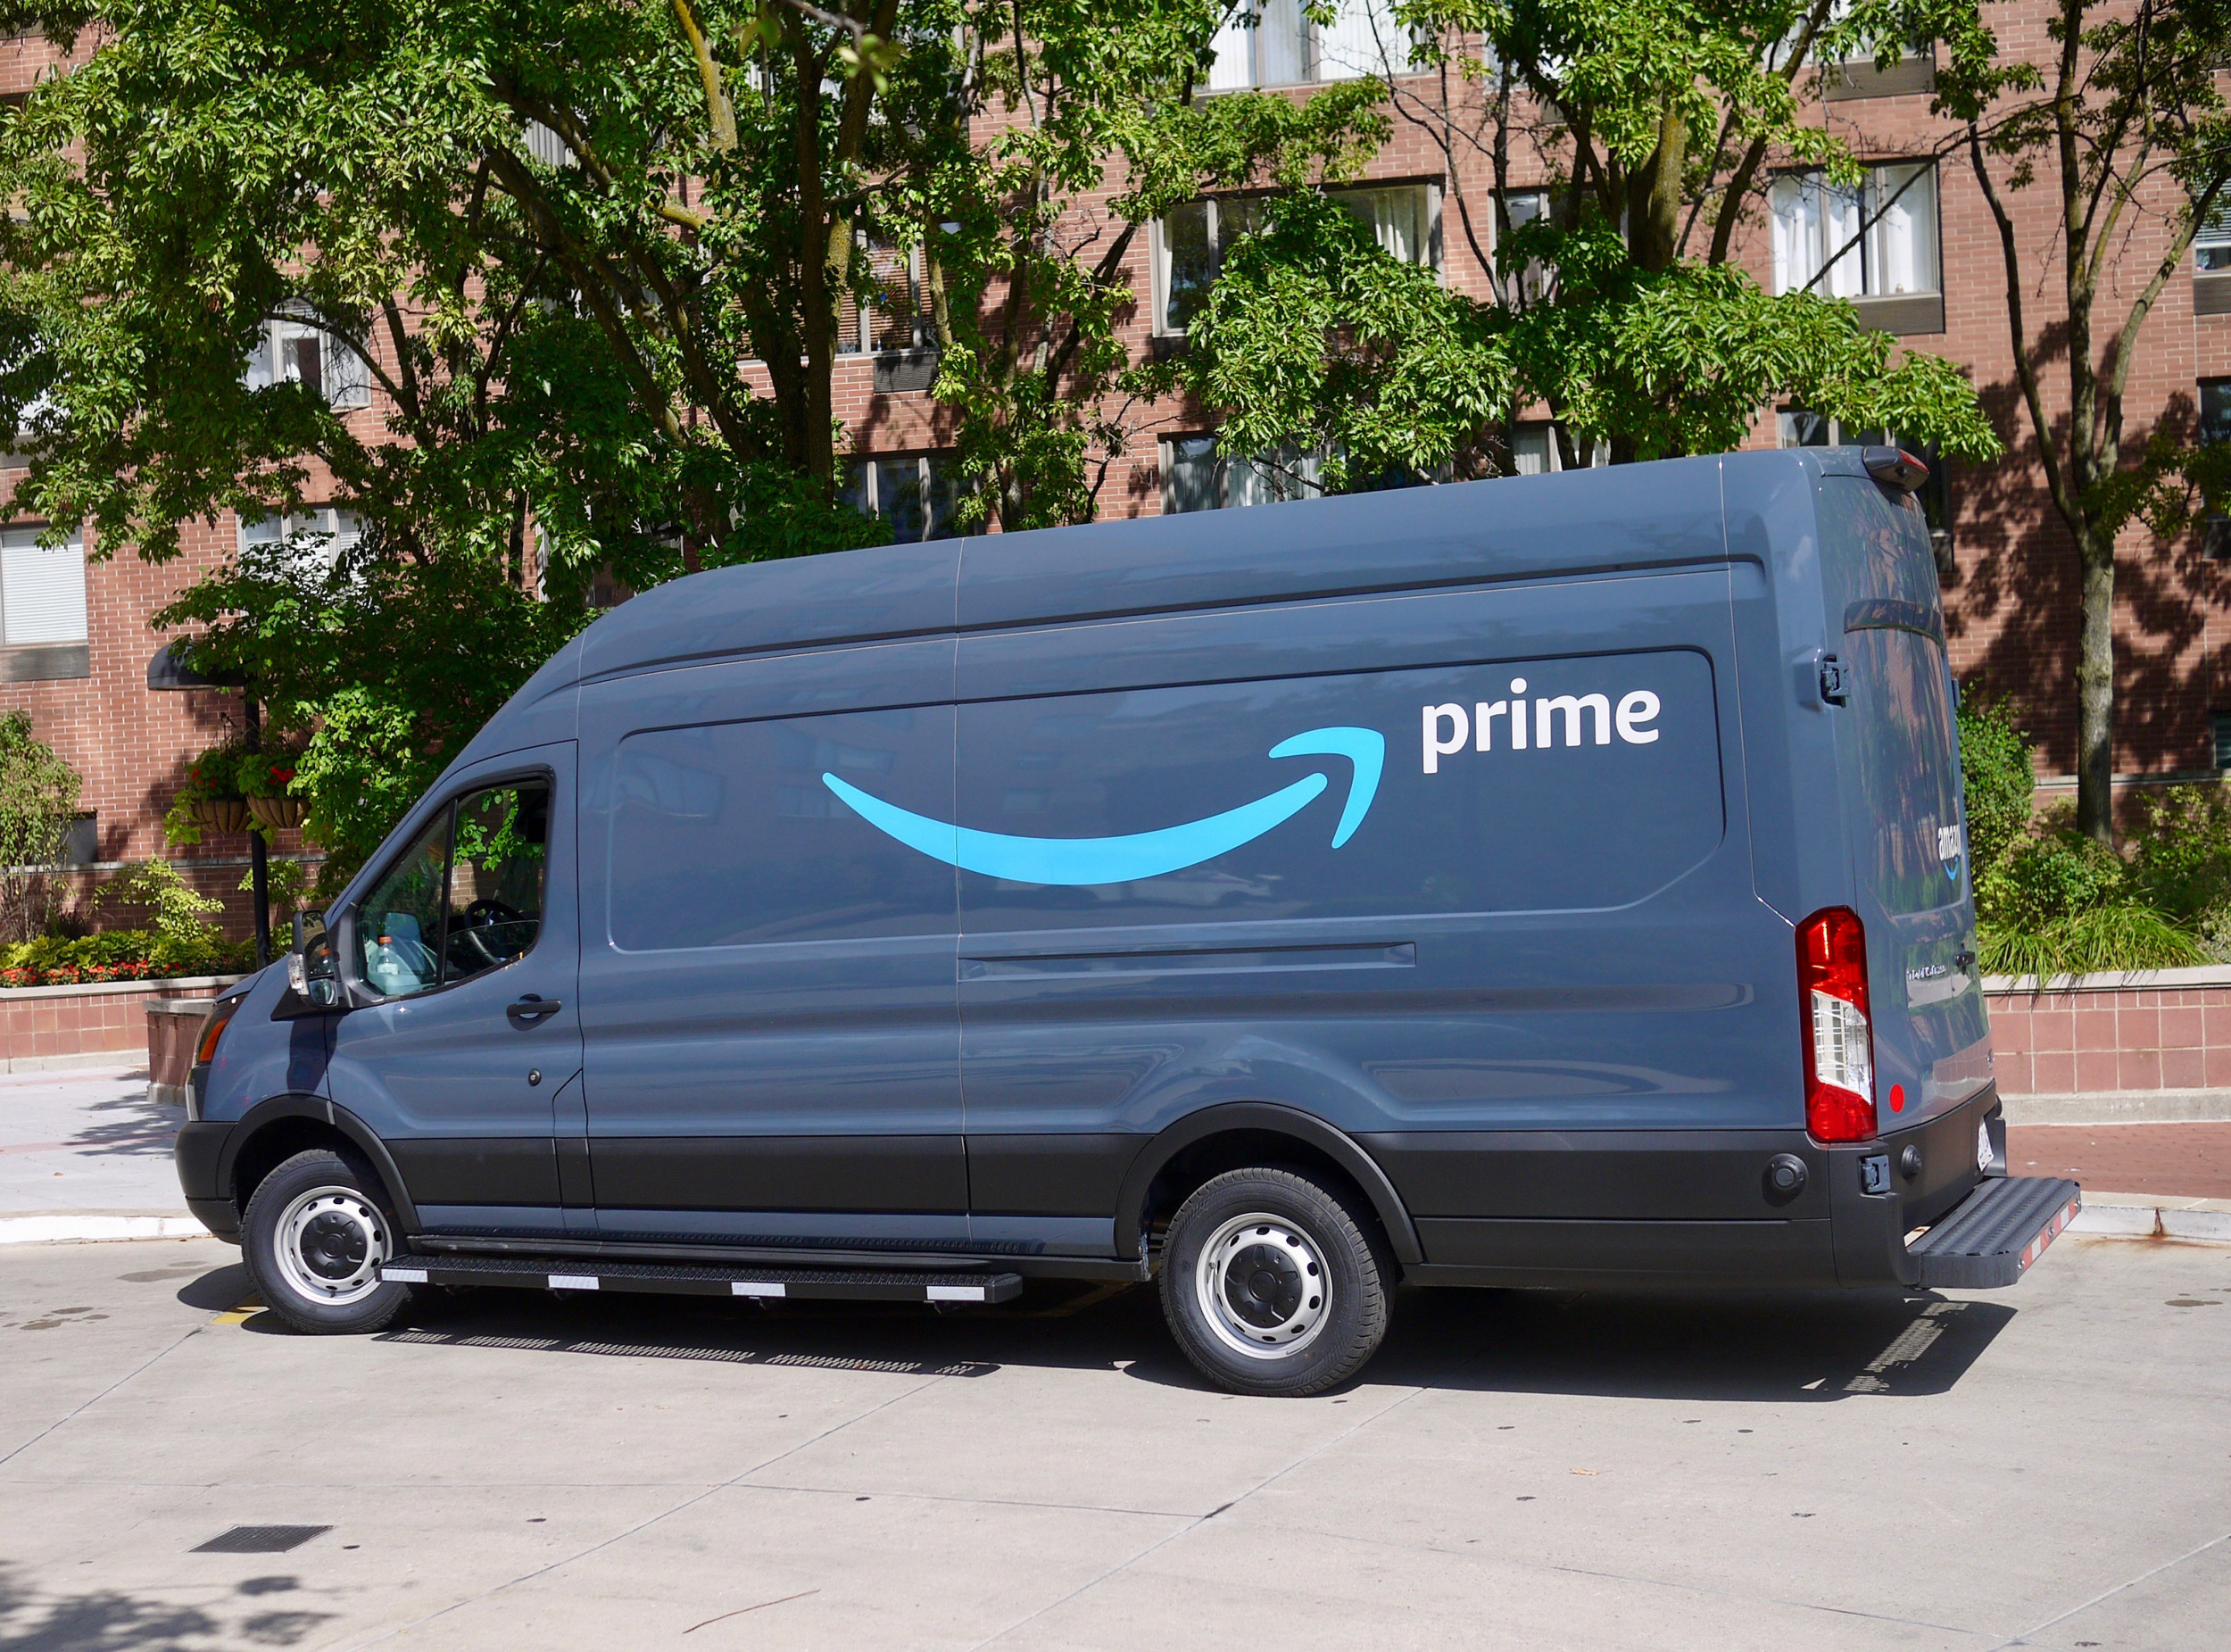 Viral Video of Woman Stepping Out of Amazon Delivery Van Viewed 10M Times